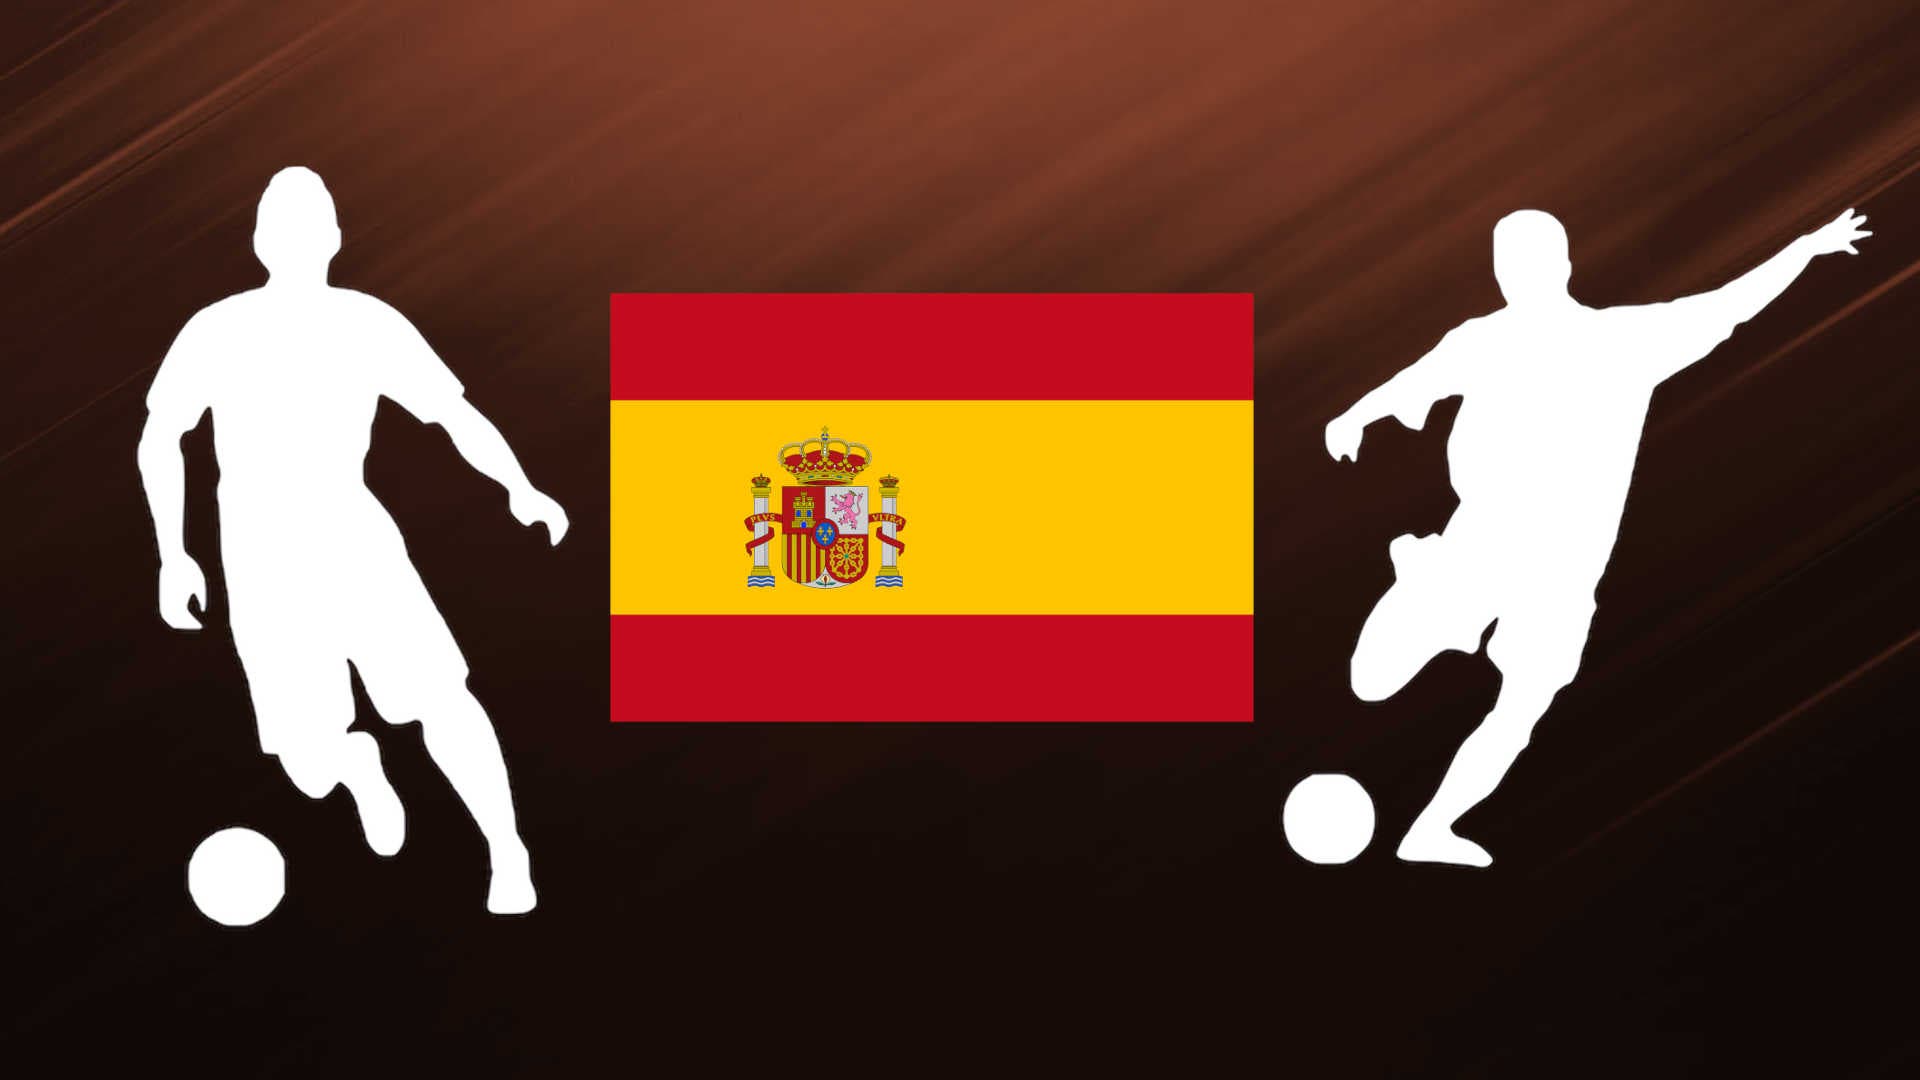 FIFA 23: these two Icons of Spain could appear as Titans of the Trophy according to the leaks